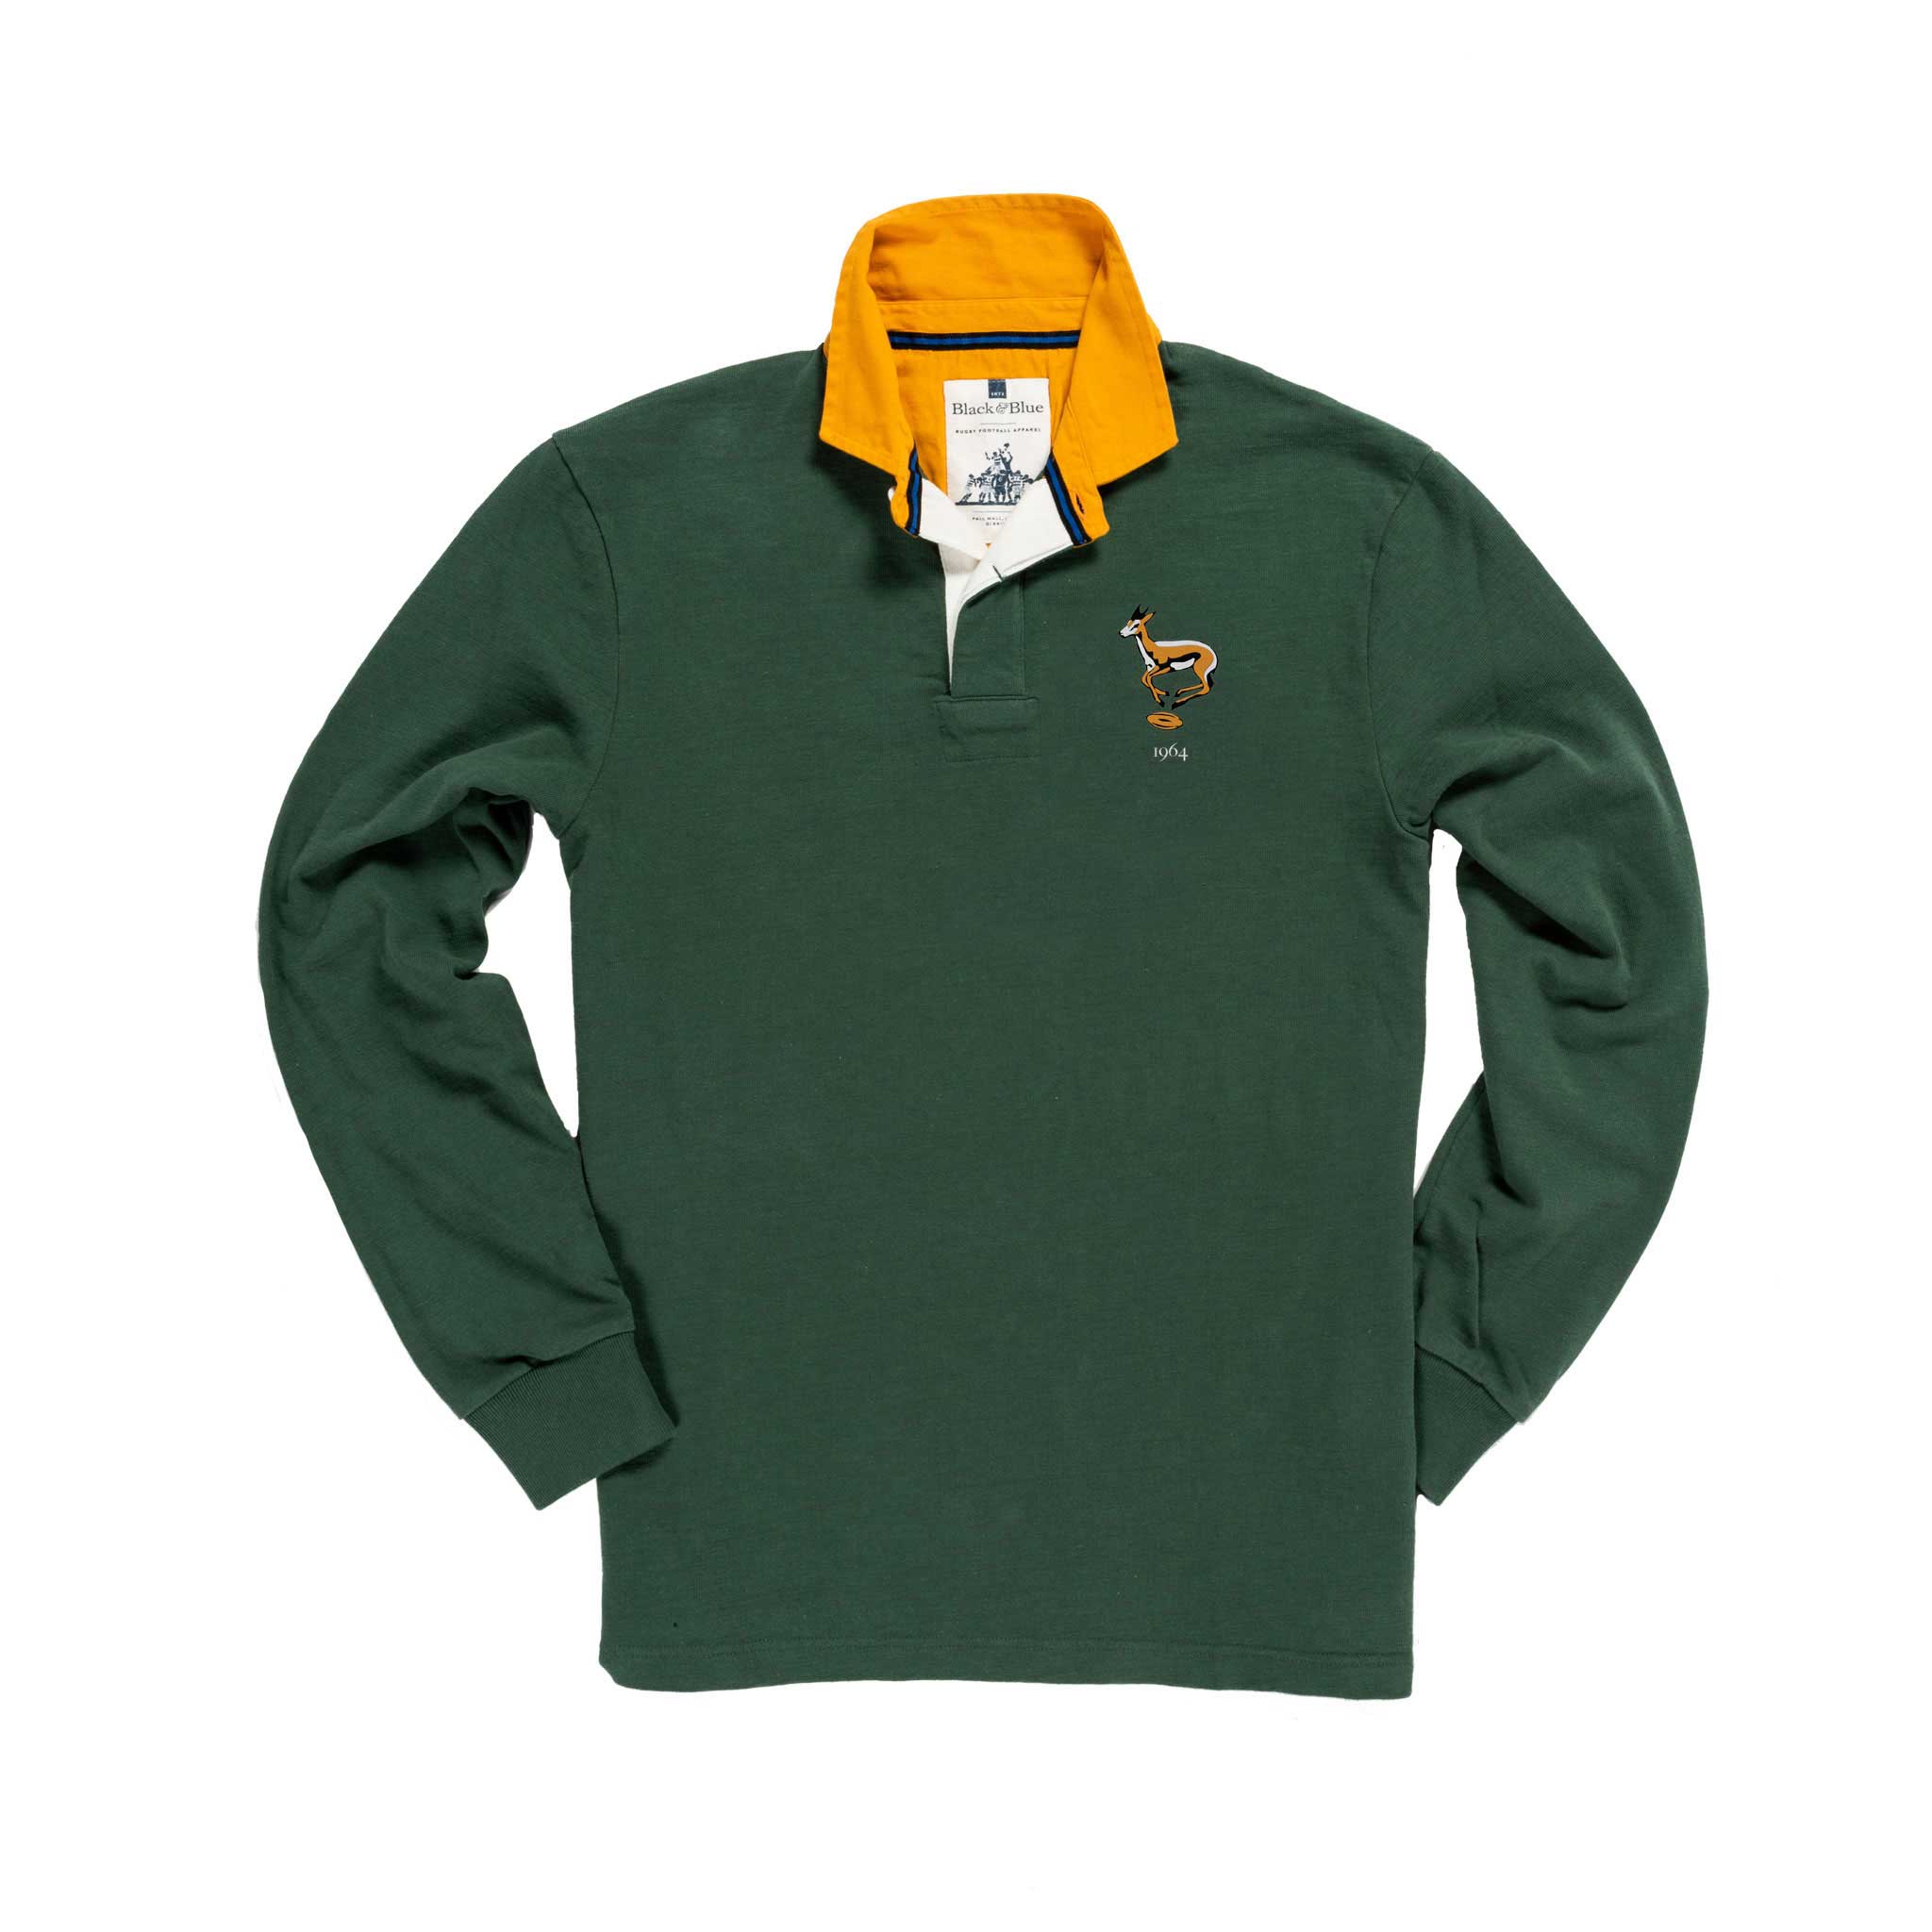 South Africa 1964 Rugby Shirt_Front